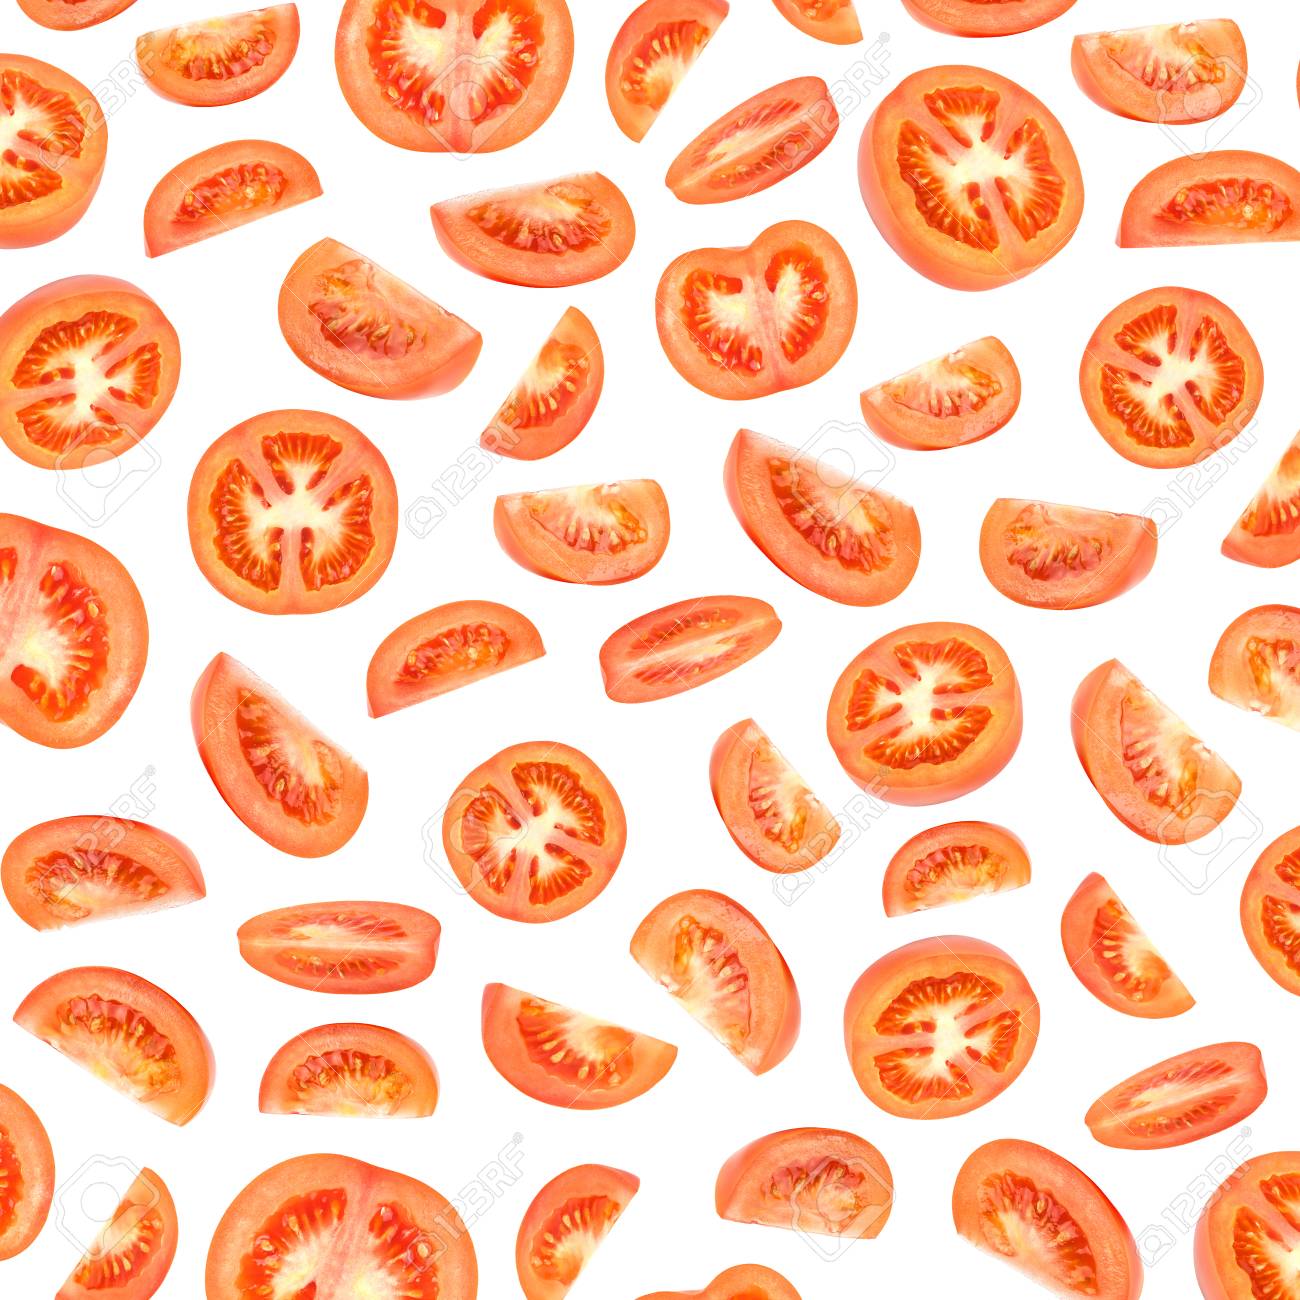 Fresh Red Tomato Photographic Pattern Wallpaper Isolated